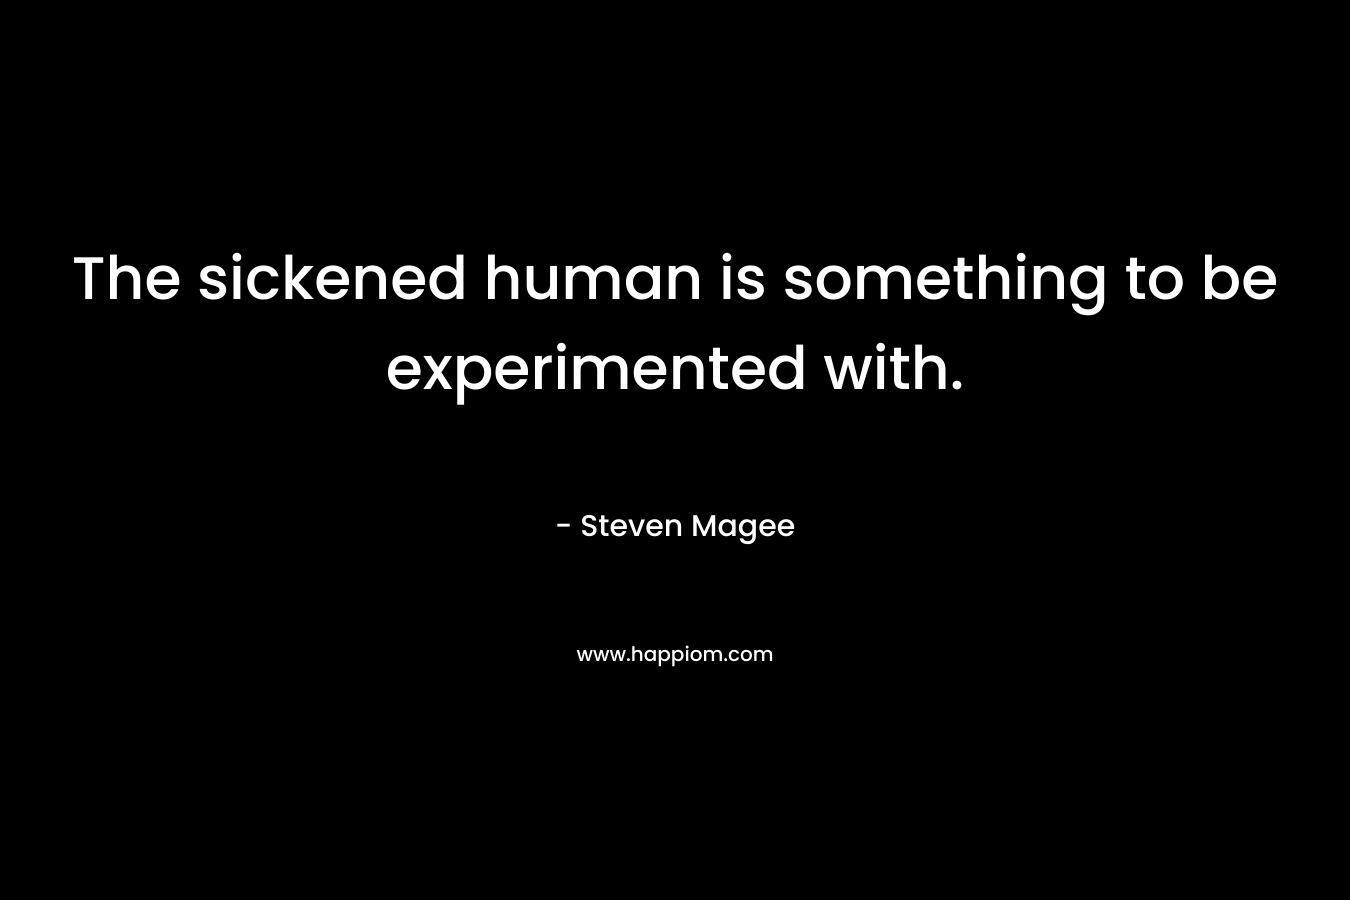 The sickened human is something to be experimented with. – Steven Magee